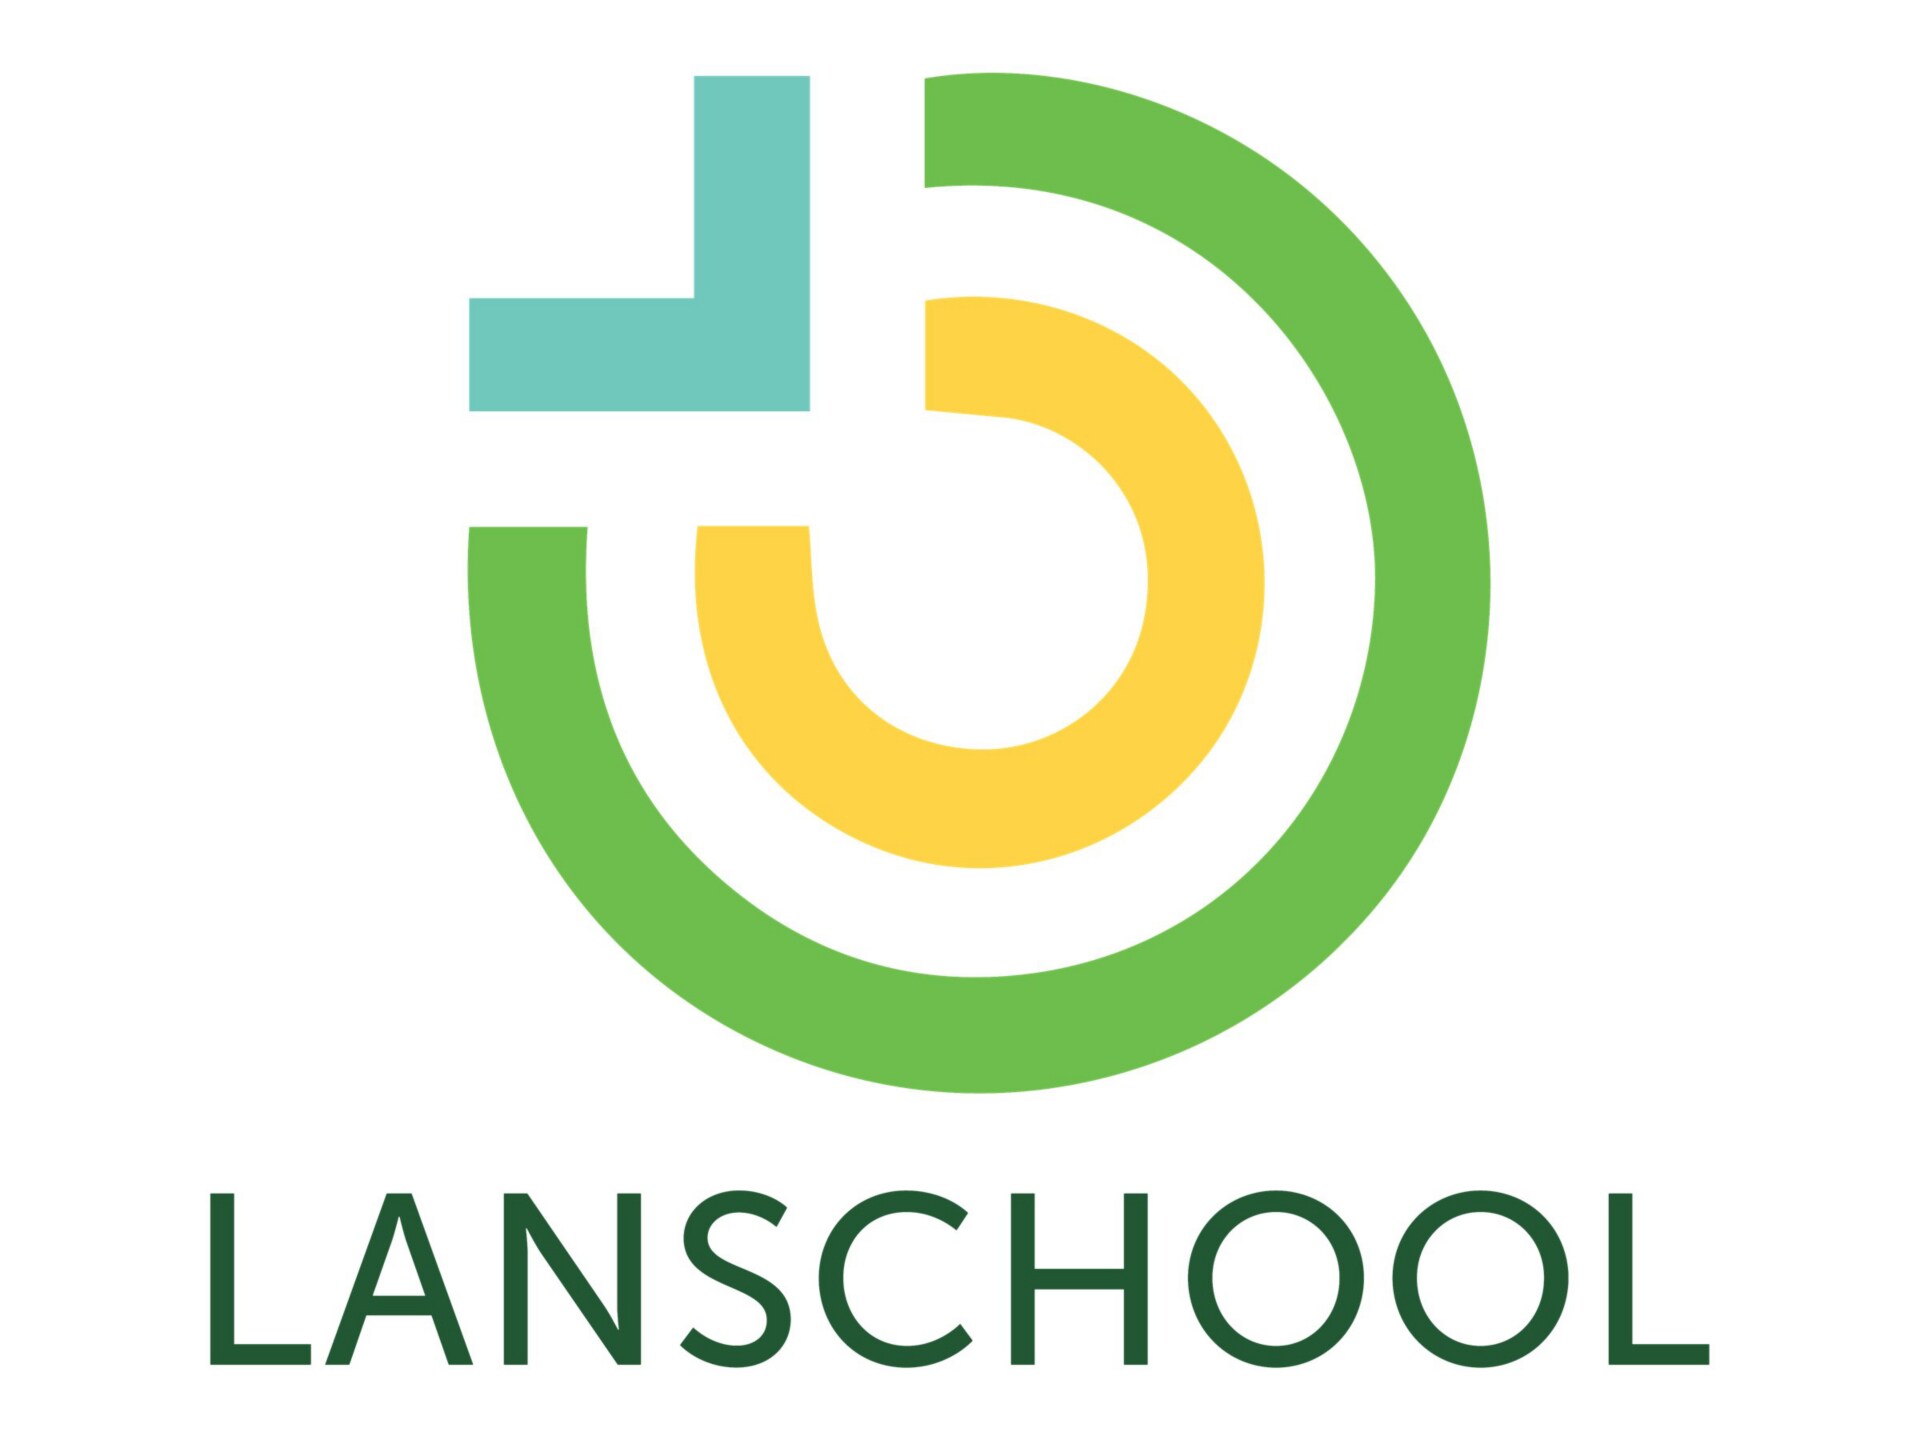 LanSchool - subscription license (10 months) + Technical Support - 1 device